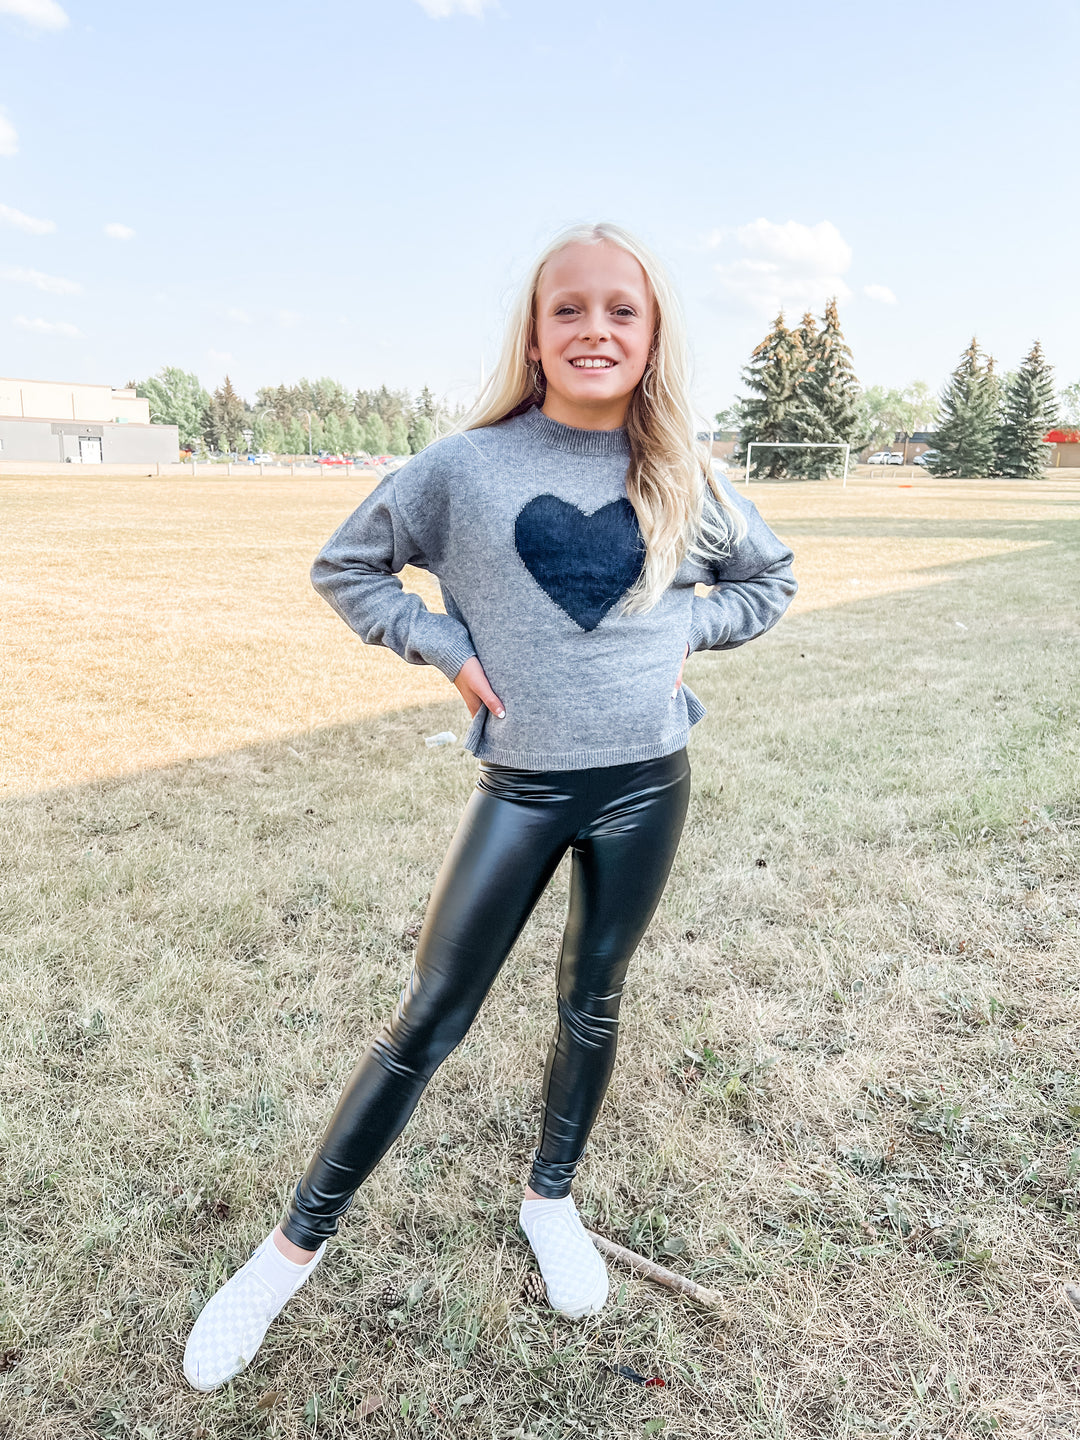 Knitted Heart Sweater- Mini Molly Grey